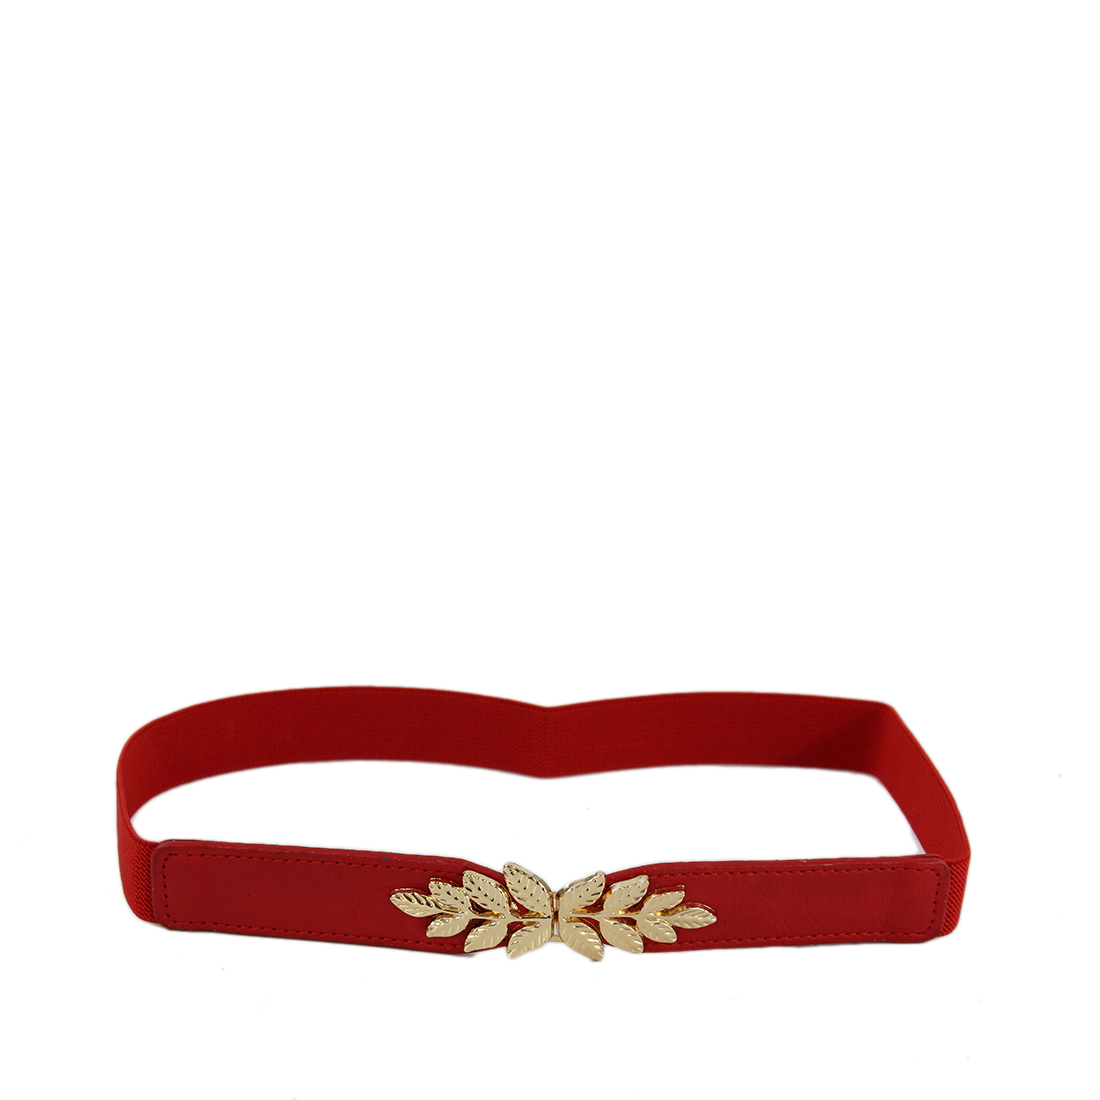 Elastic design with gold fancy buckle